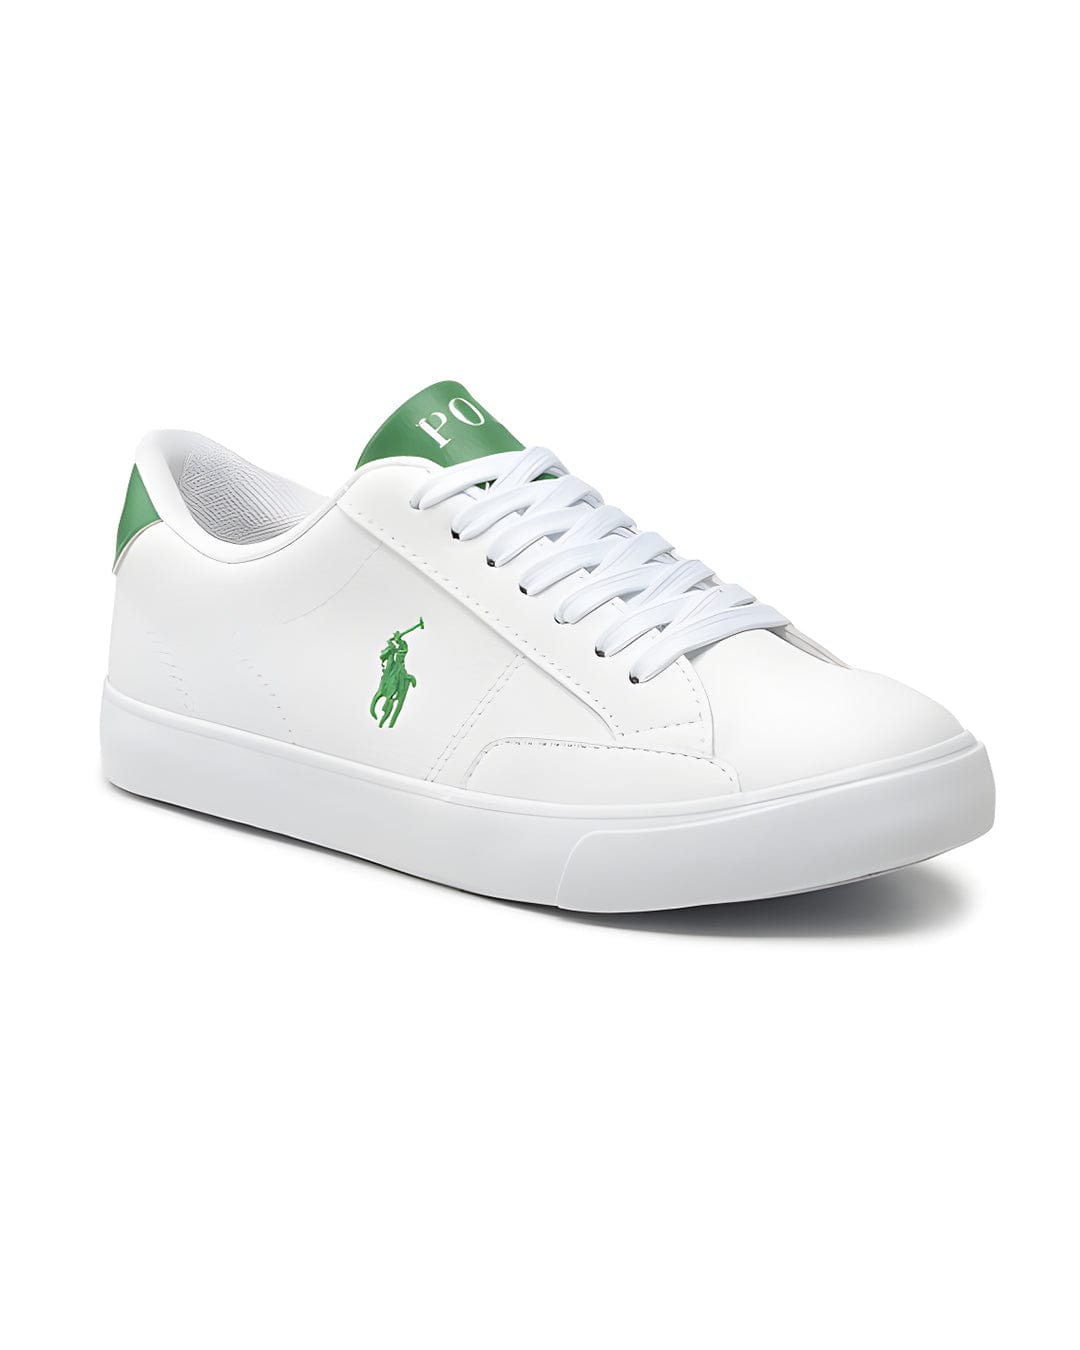 Polo Ralph Lauren Shoes Boys Polo Ralph Lauren White And Green Sneakers